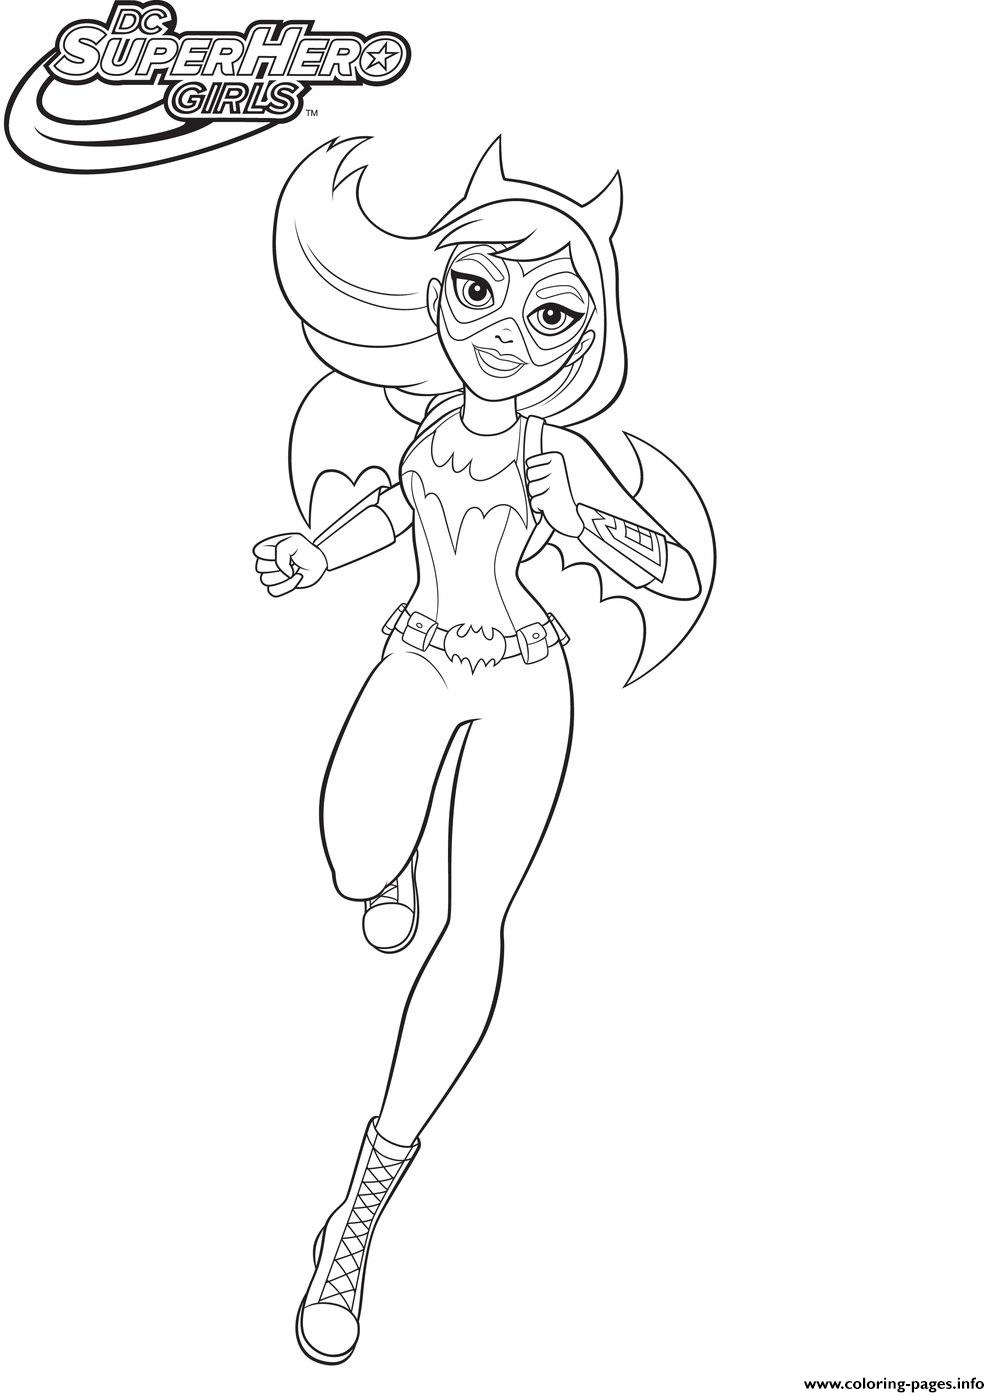 Bat-Girl Coloring Pages - Coloring Home